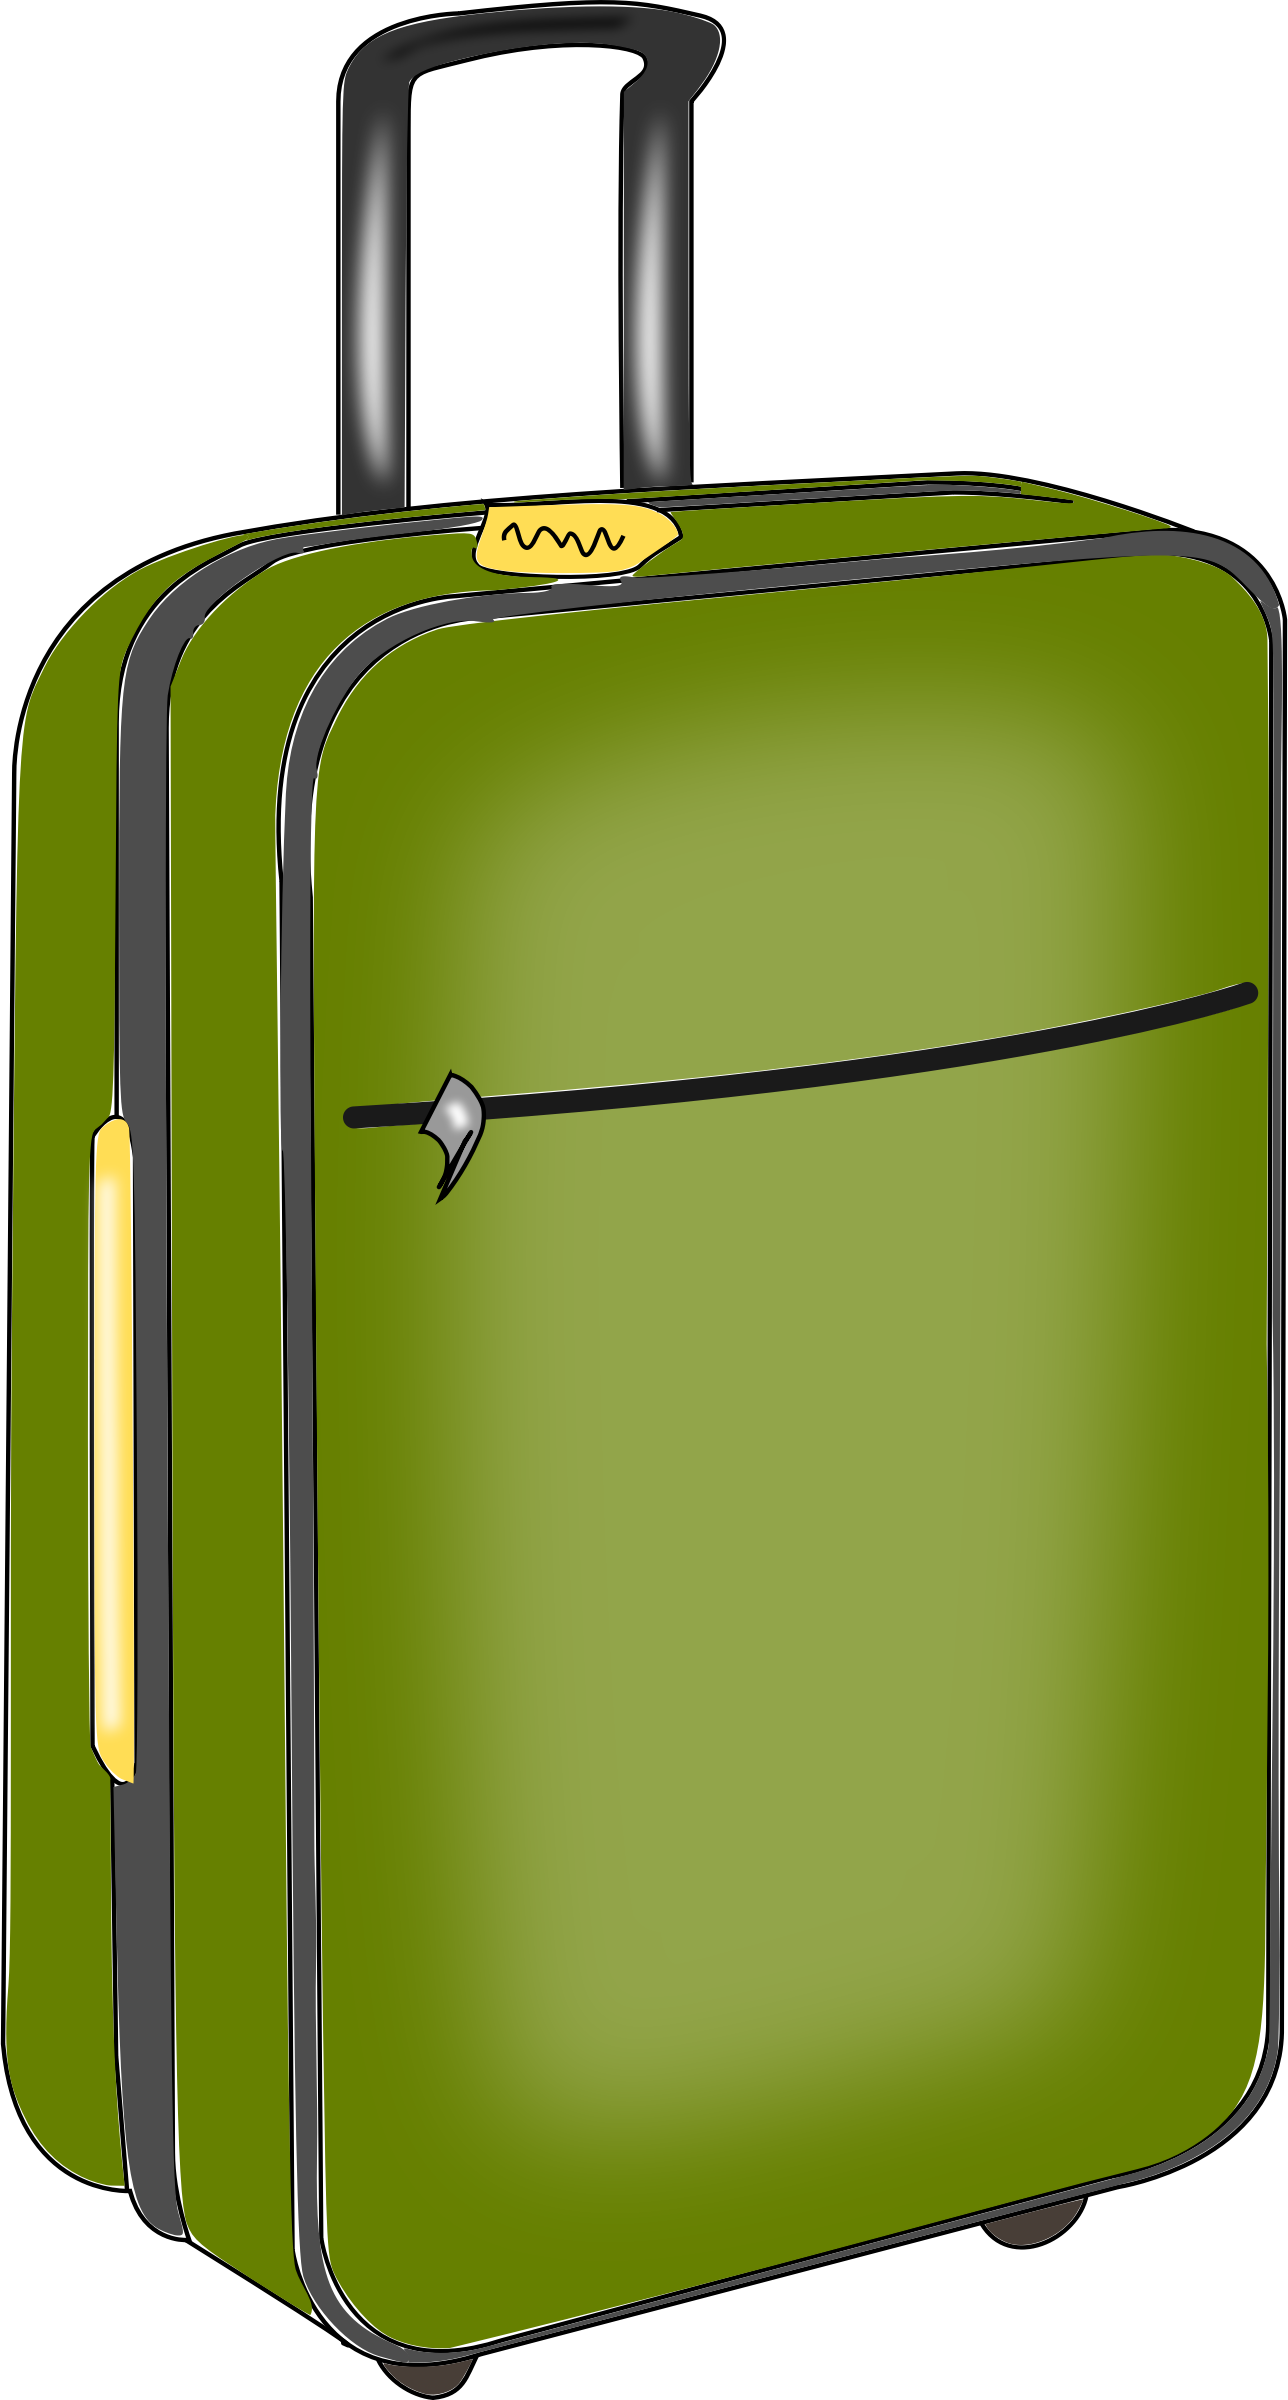 office clipart suitcase